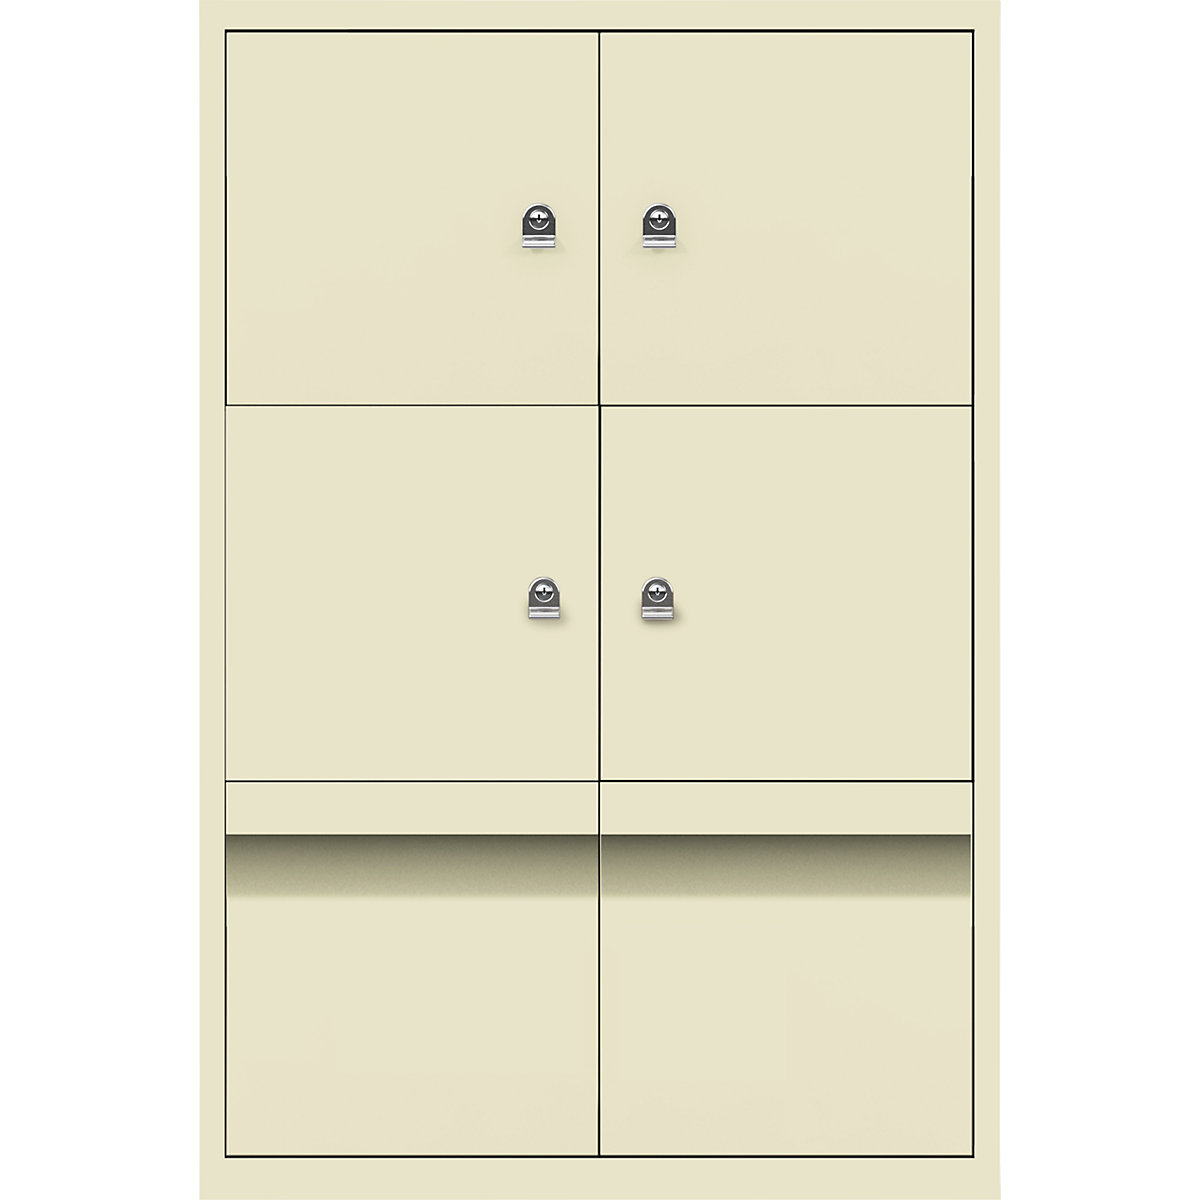 LateralFile™ lodge – BISLEY, with 4 lockable compartments and 2 drawers, height 375 mm each, light ivory-12